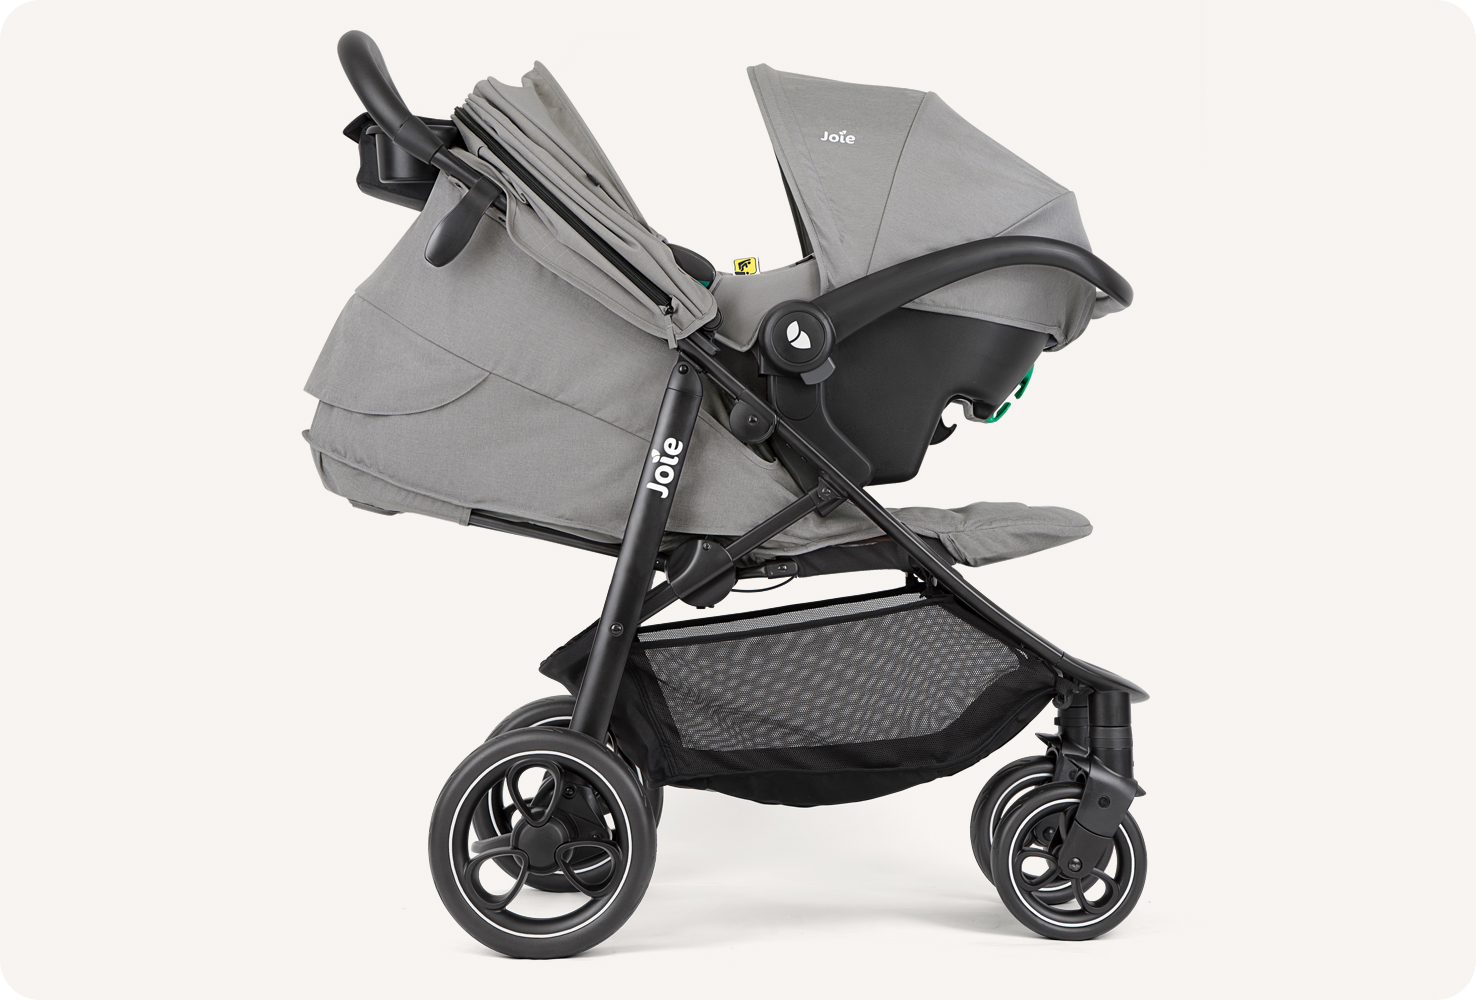 JoIe gray litetrax stroller with infant carrier. 